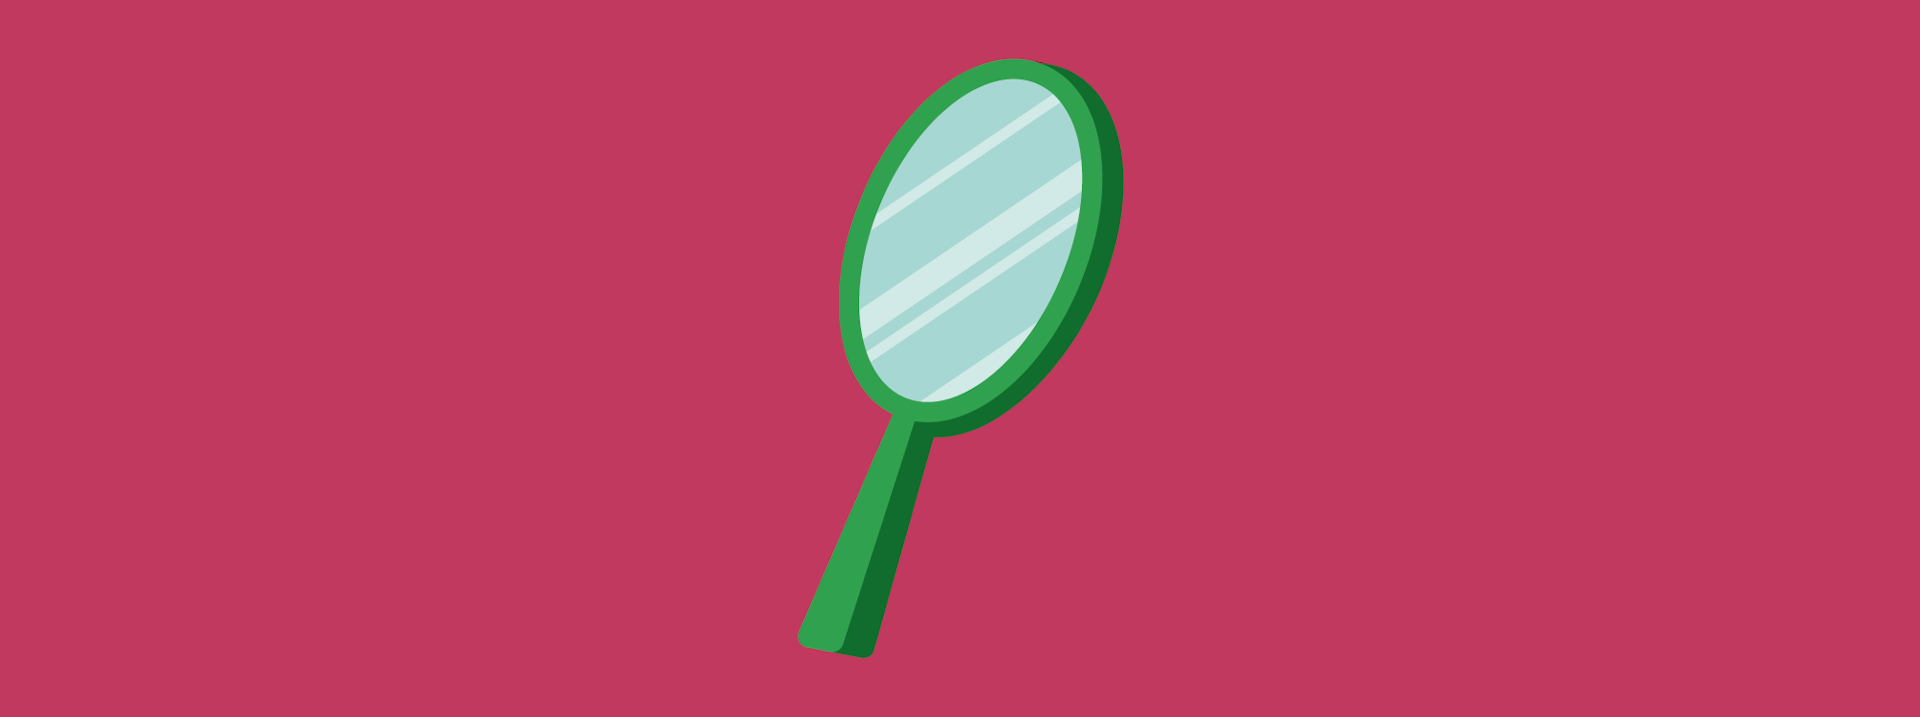 Illustration of a hand-held mirror on a pink background.